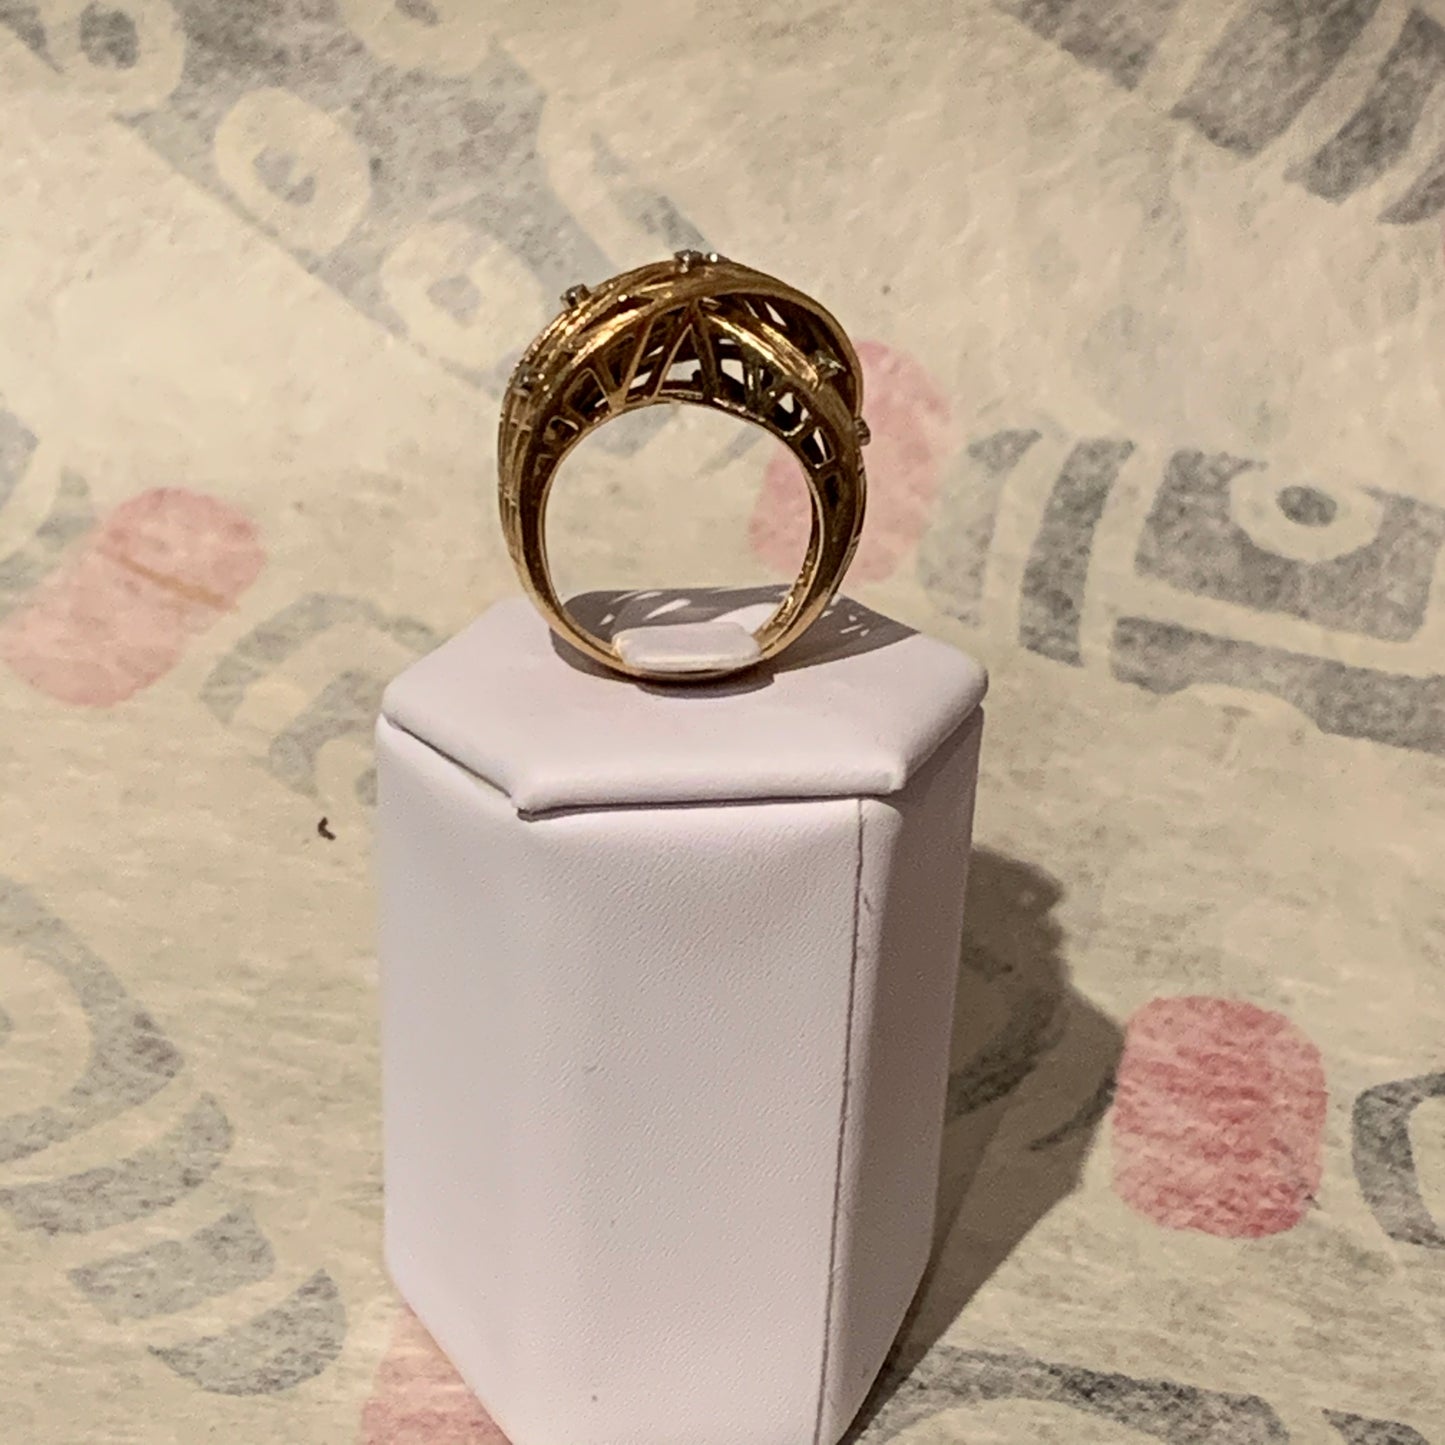 An 18k gold and diamond ring